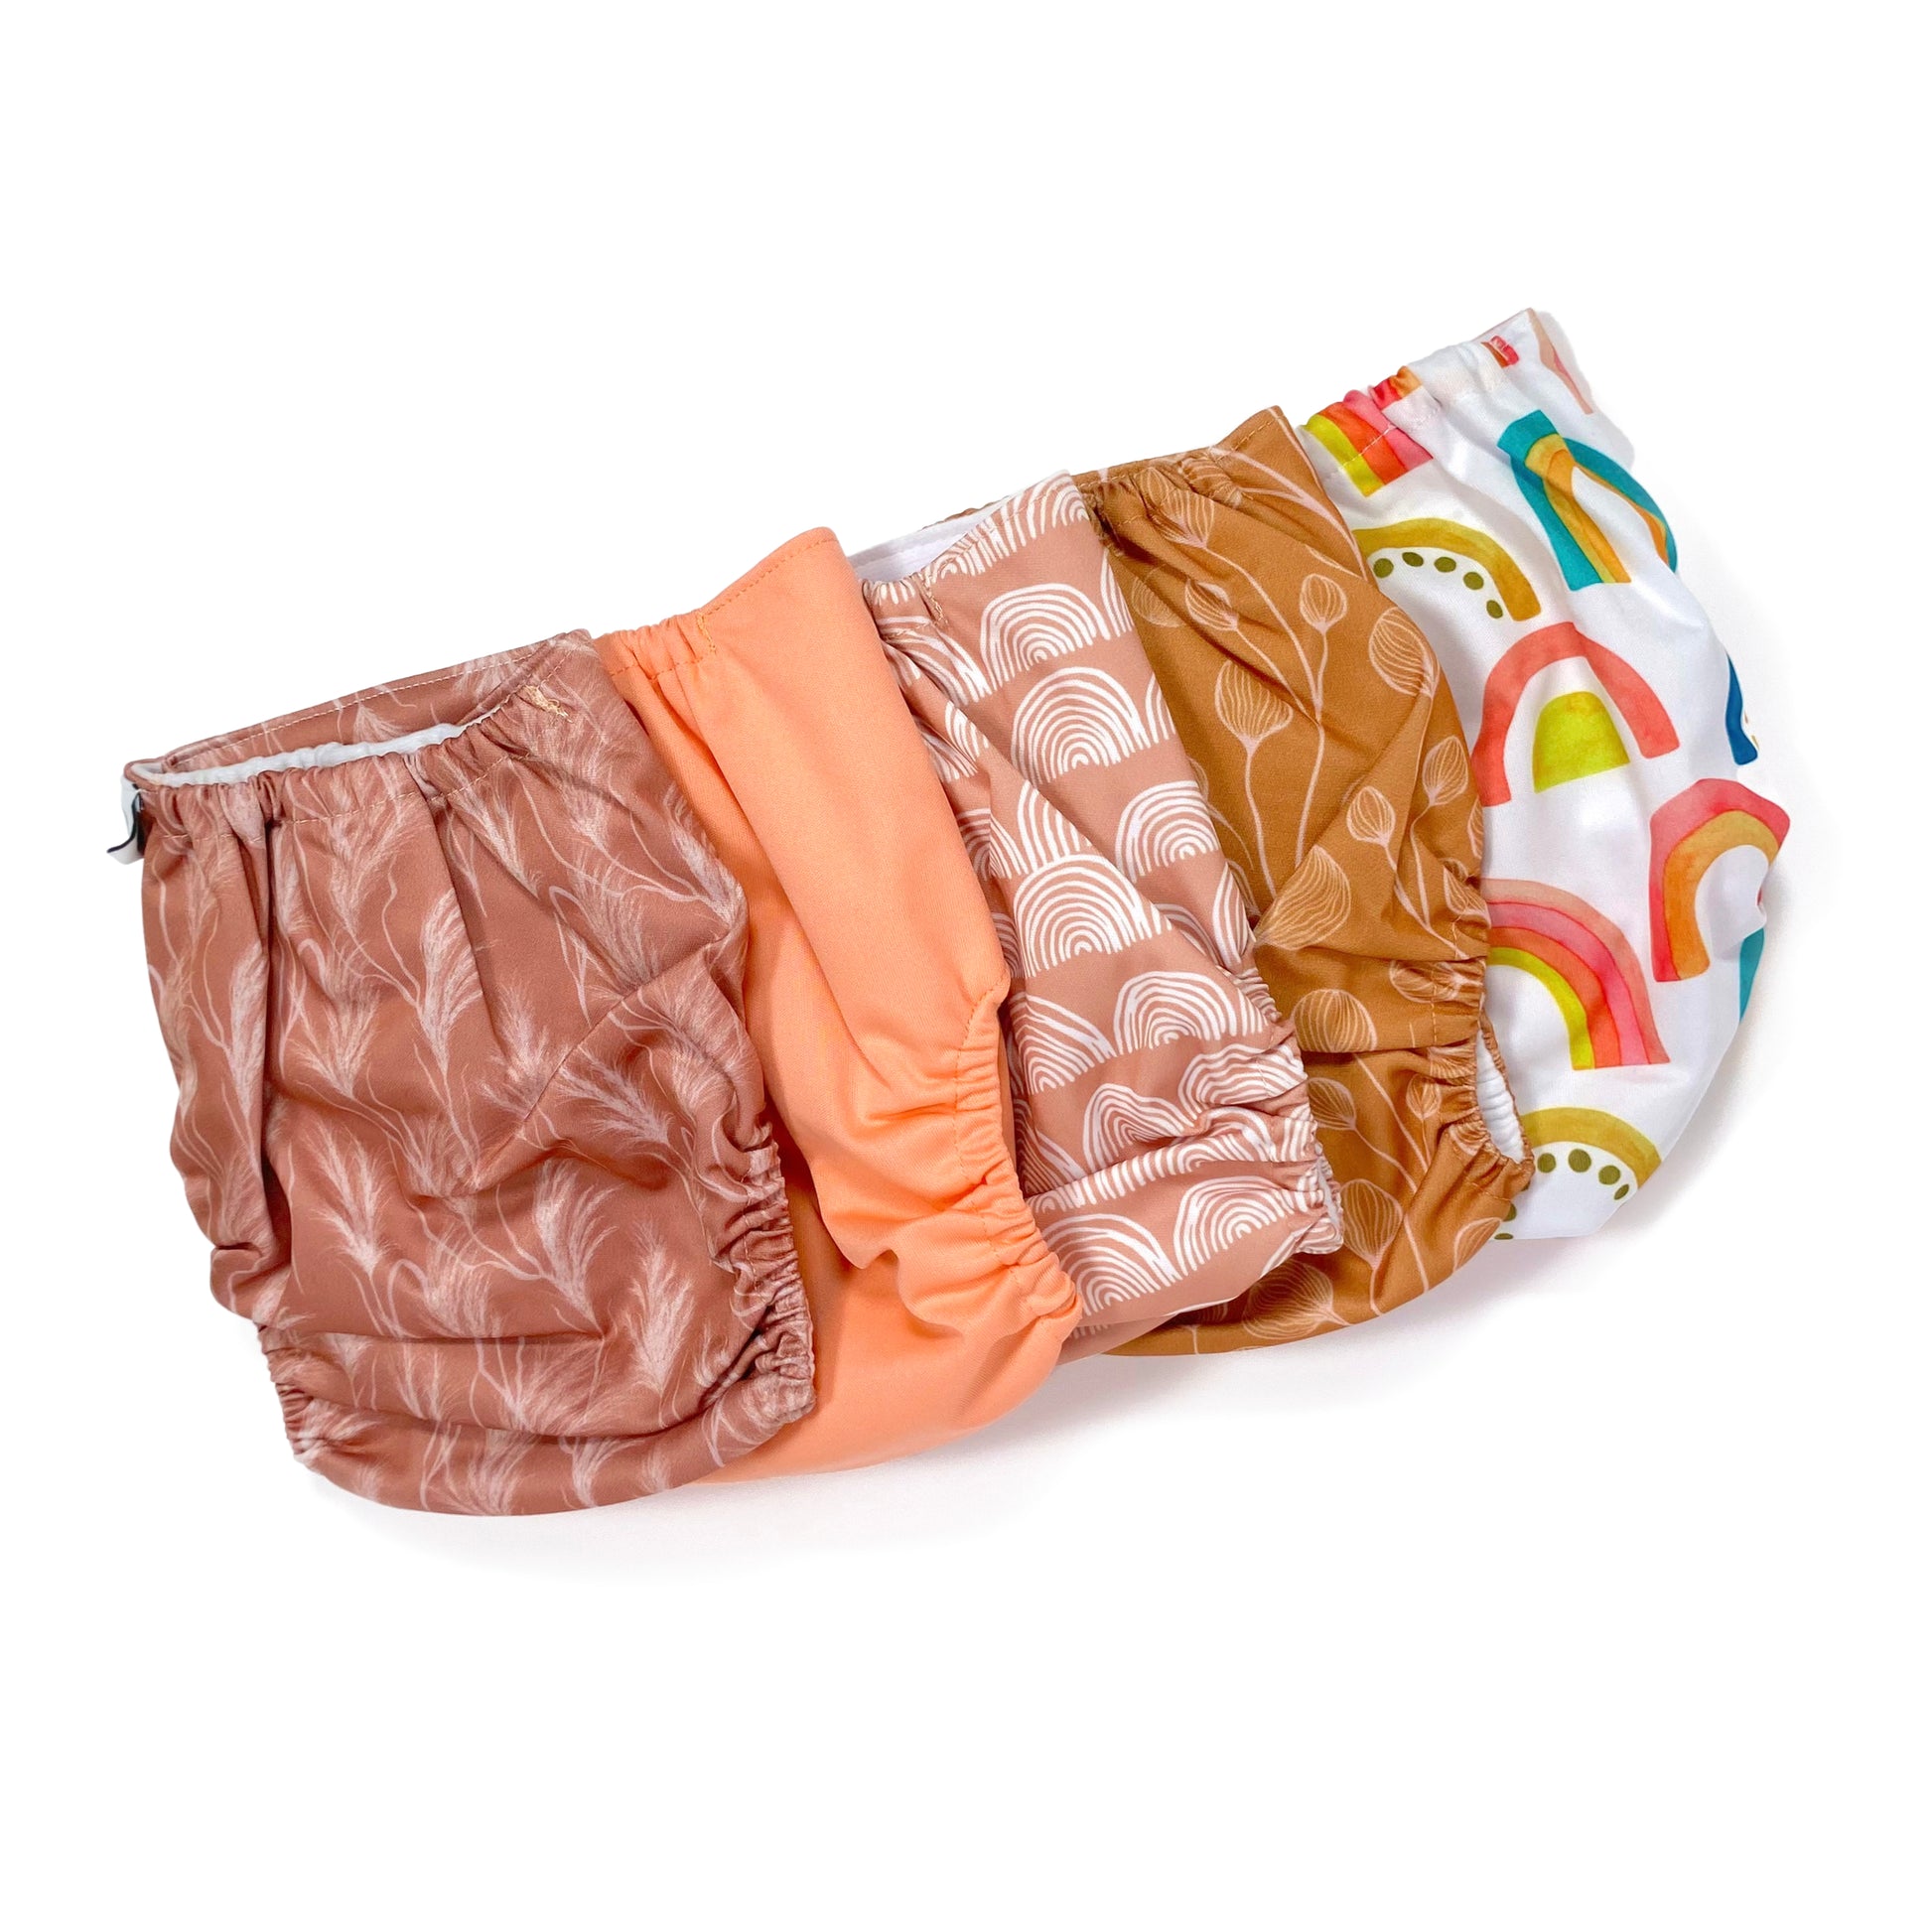 A set of five reusable nappies, made from 100% recycled polyester. The included nappies are: Bright Rainbow, Copper Bloom, Peach Rainbow, Cute Coral and Sunset Dune. View shows all five nappies back facing, in a diagonal line.